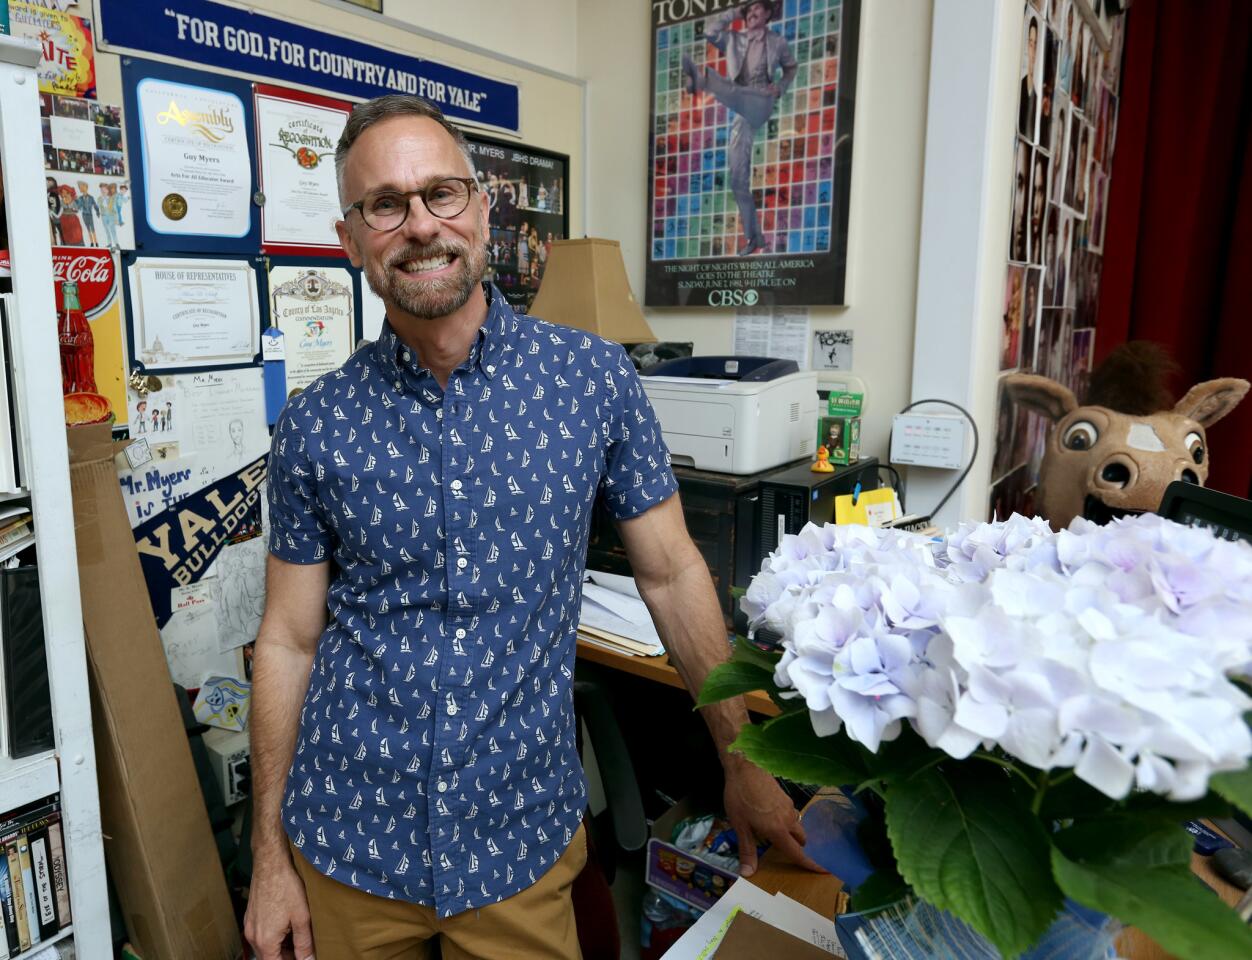 Burroughs High School drama teacher Guy Myers was named Burbank Unified School District Teacher of the Year, during class in Burbank on Wednesday, April 17, 2019. District officials stopped by his class to give him the news.